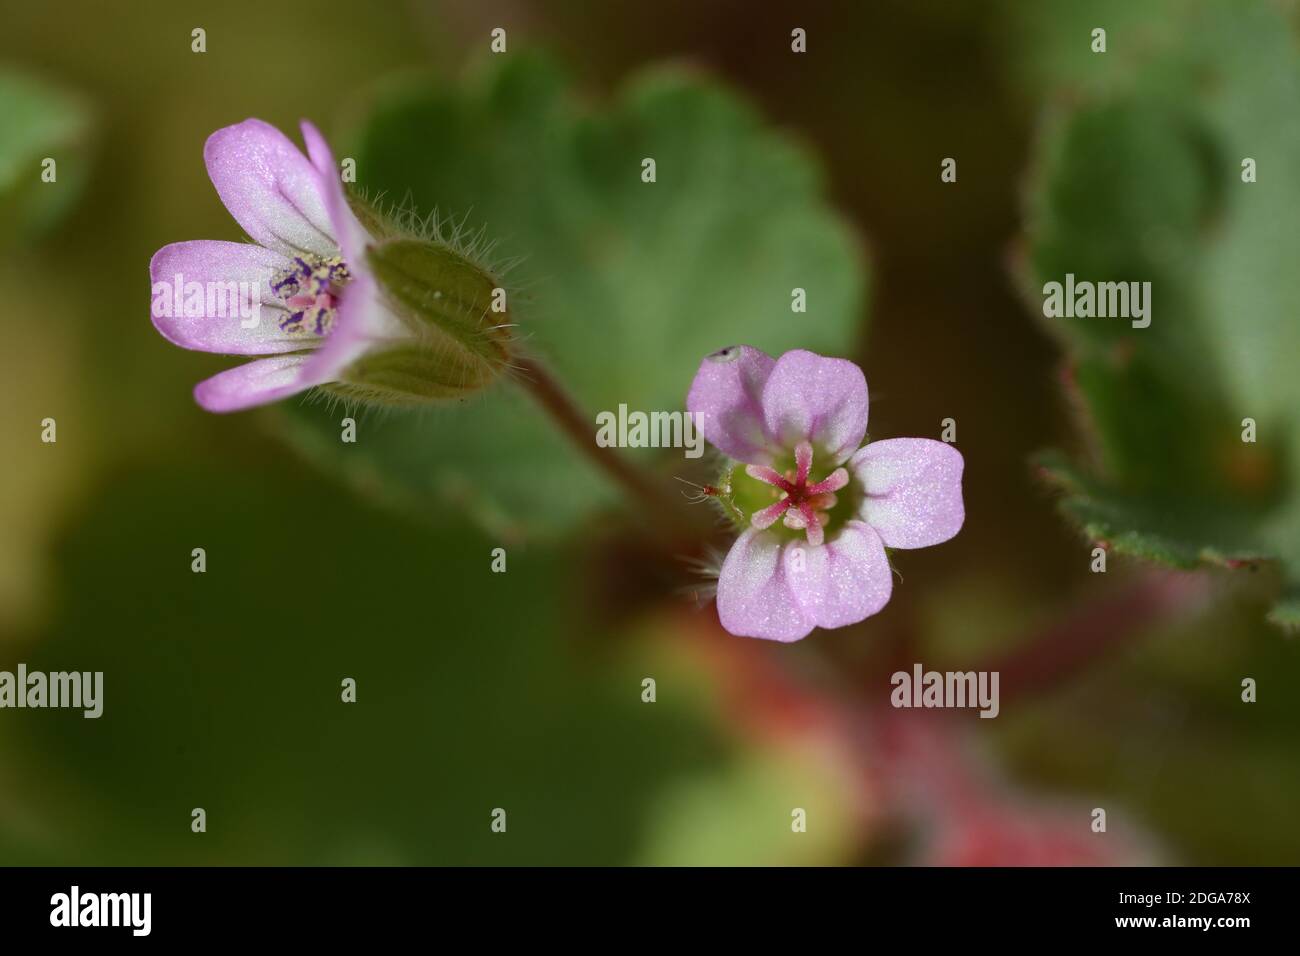 Macro photograph of a wild flower of the Geranium rotundifolium species, with microscopic dimensions that do not exceed half a centimeter. Stock Photo